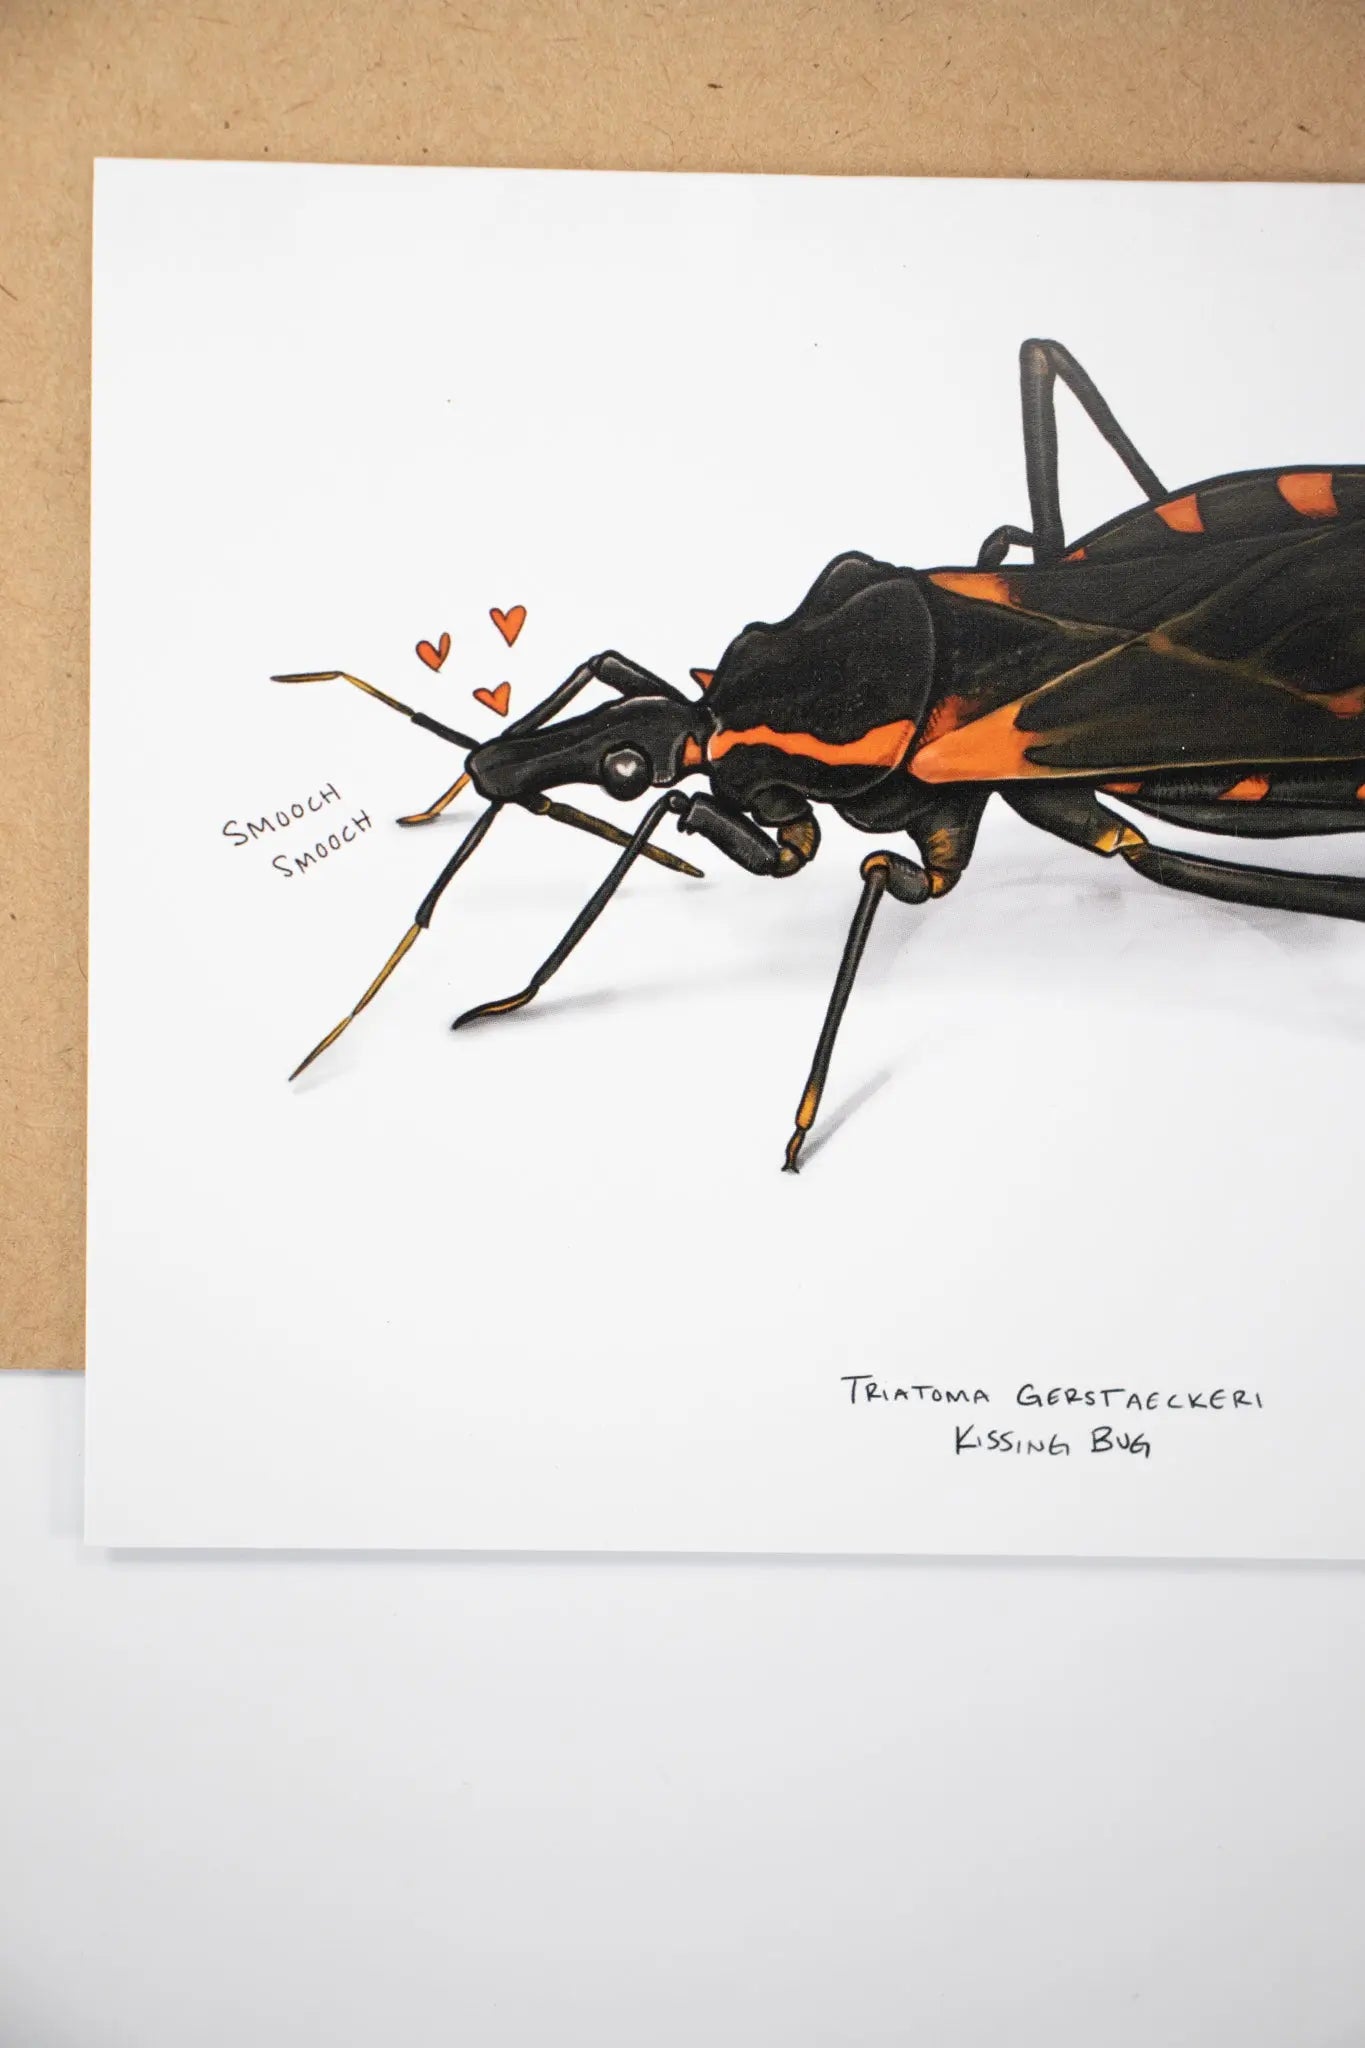 Kissing Bug Card - Stemcell Science Shop